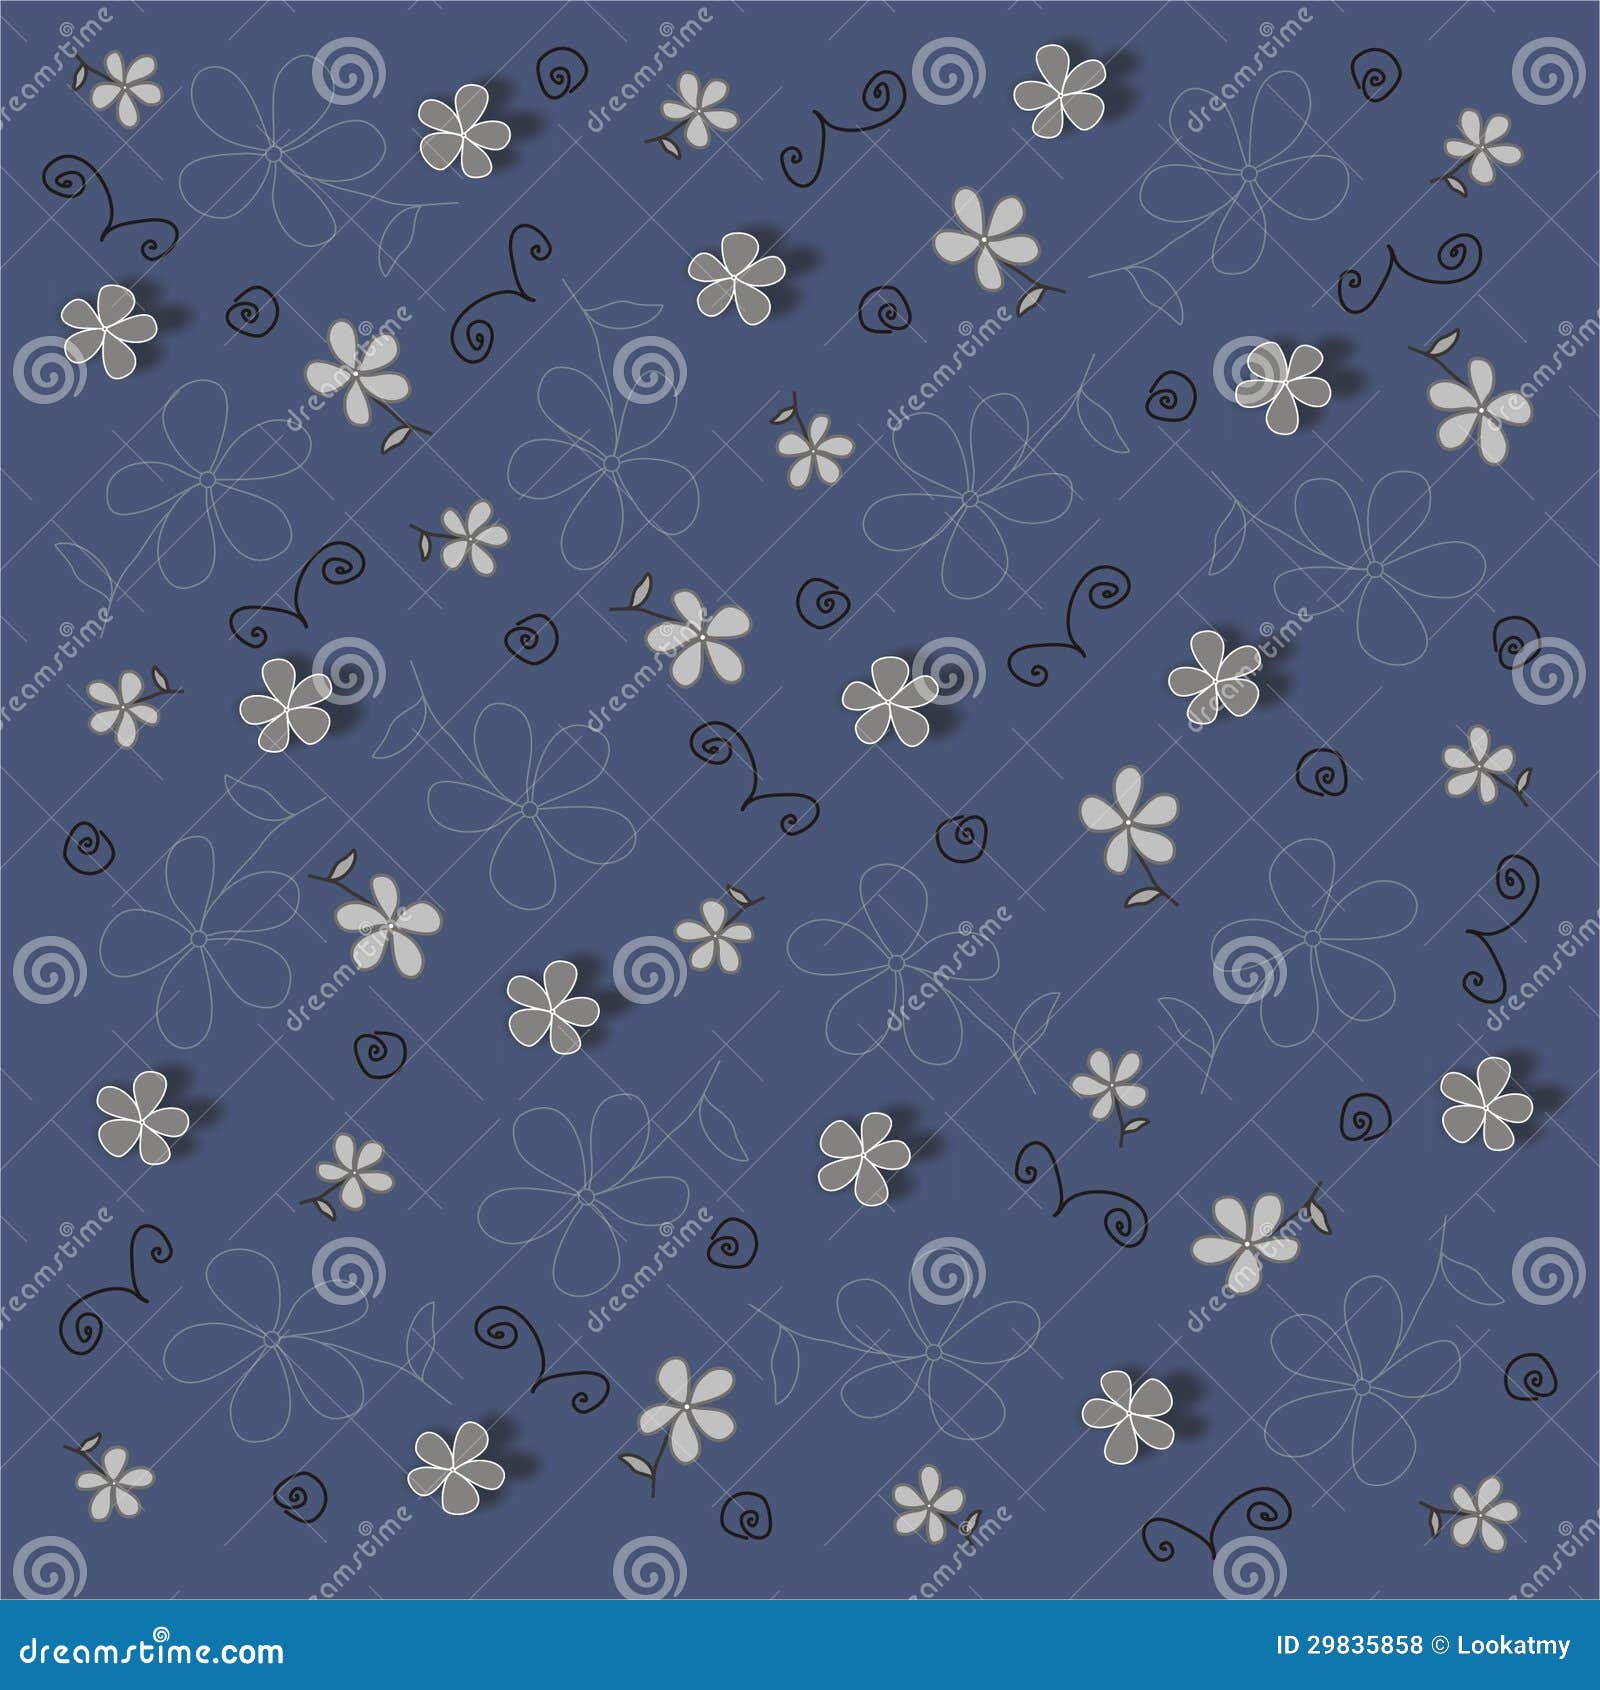 Vector Navy Blue Floral Background Royalty Free Stock Photos - Image